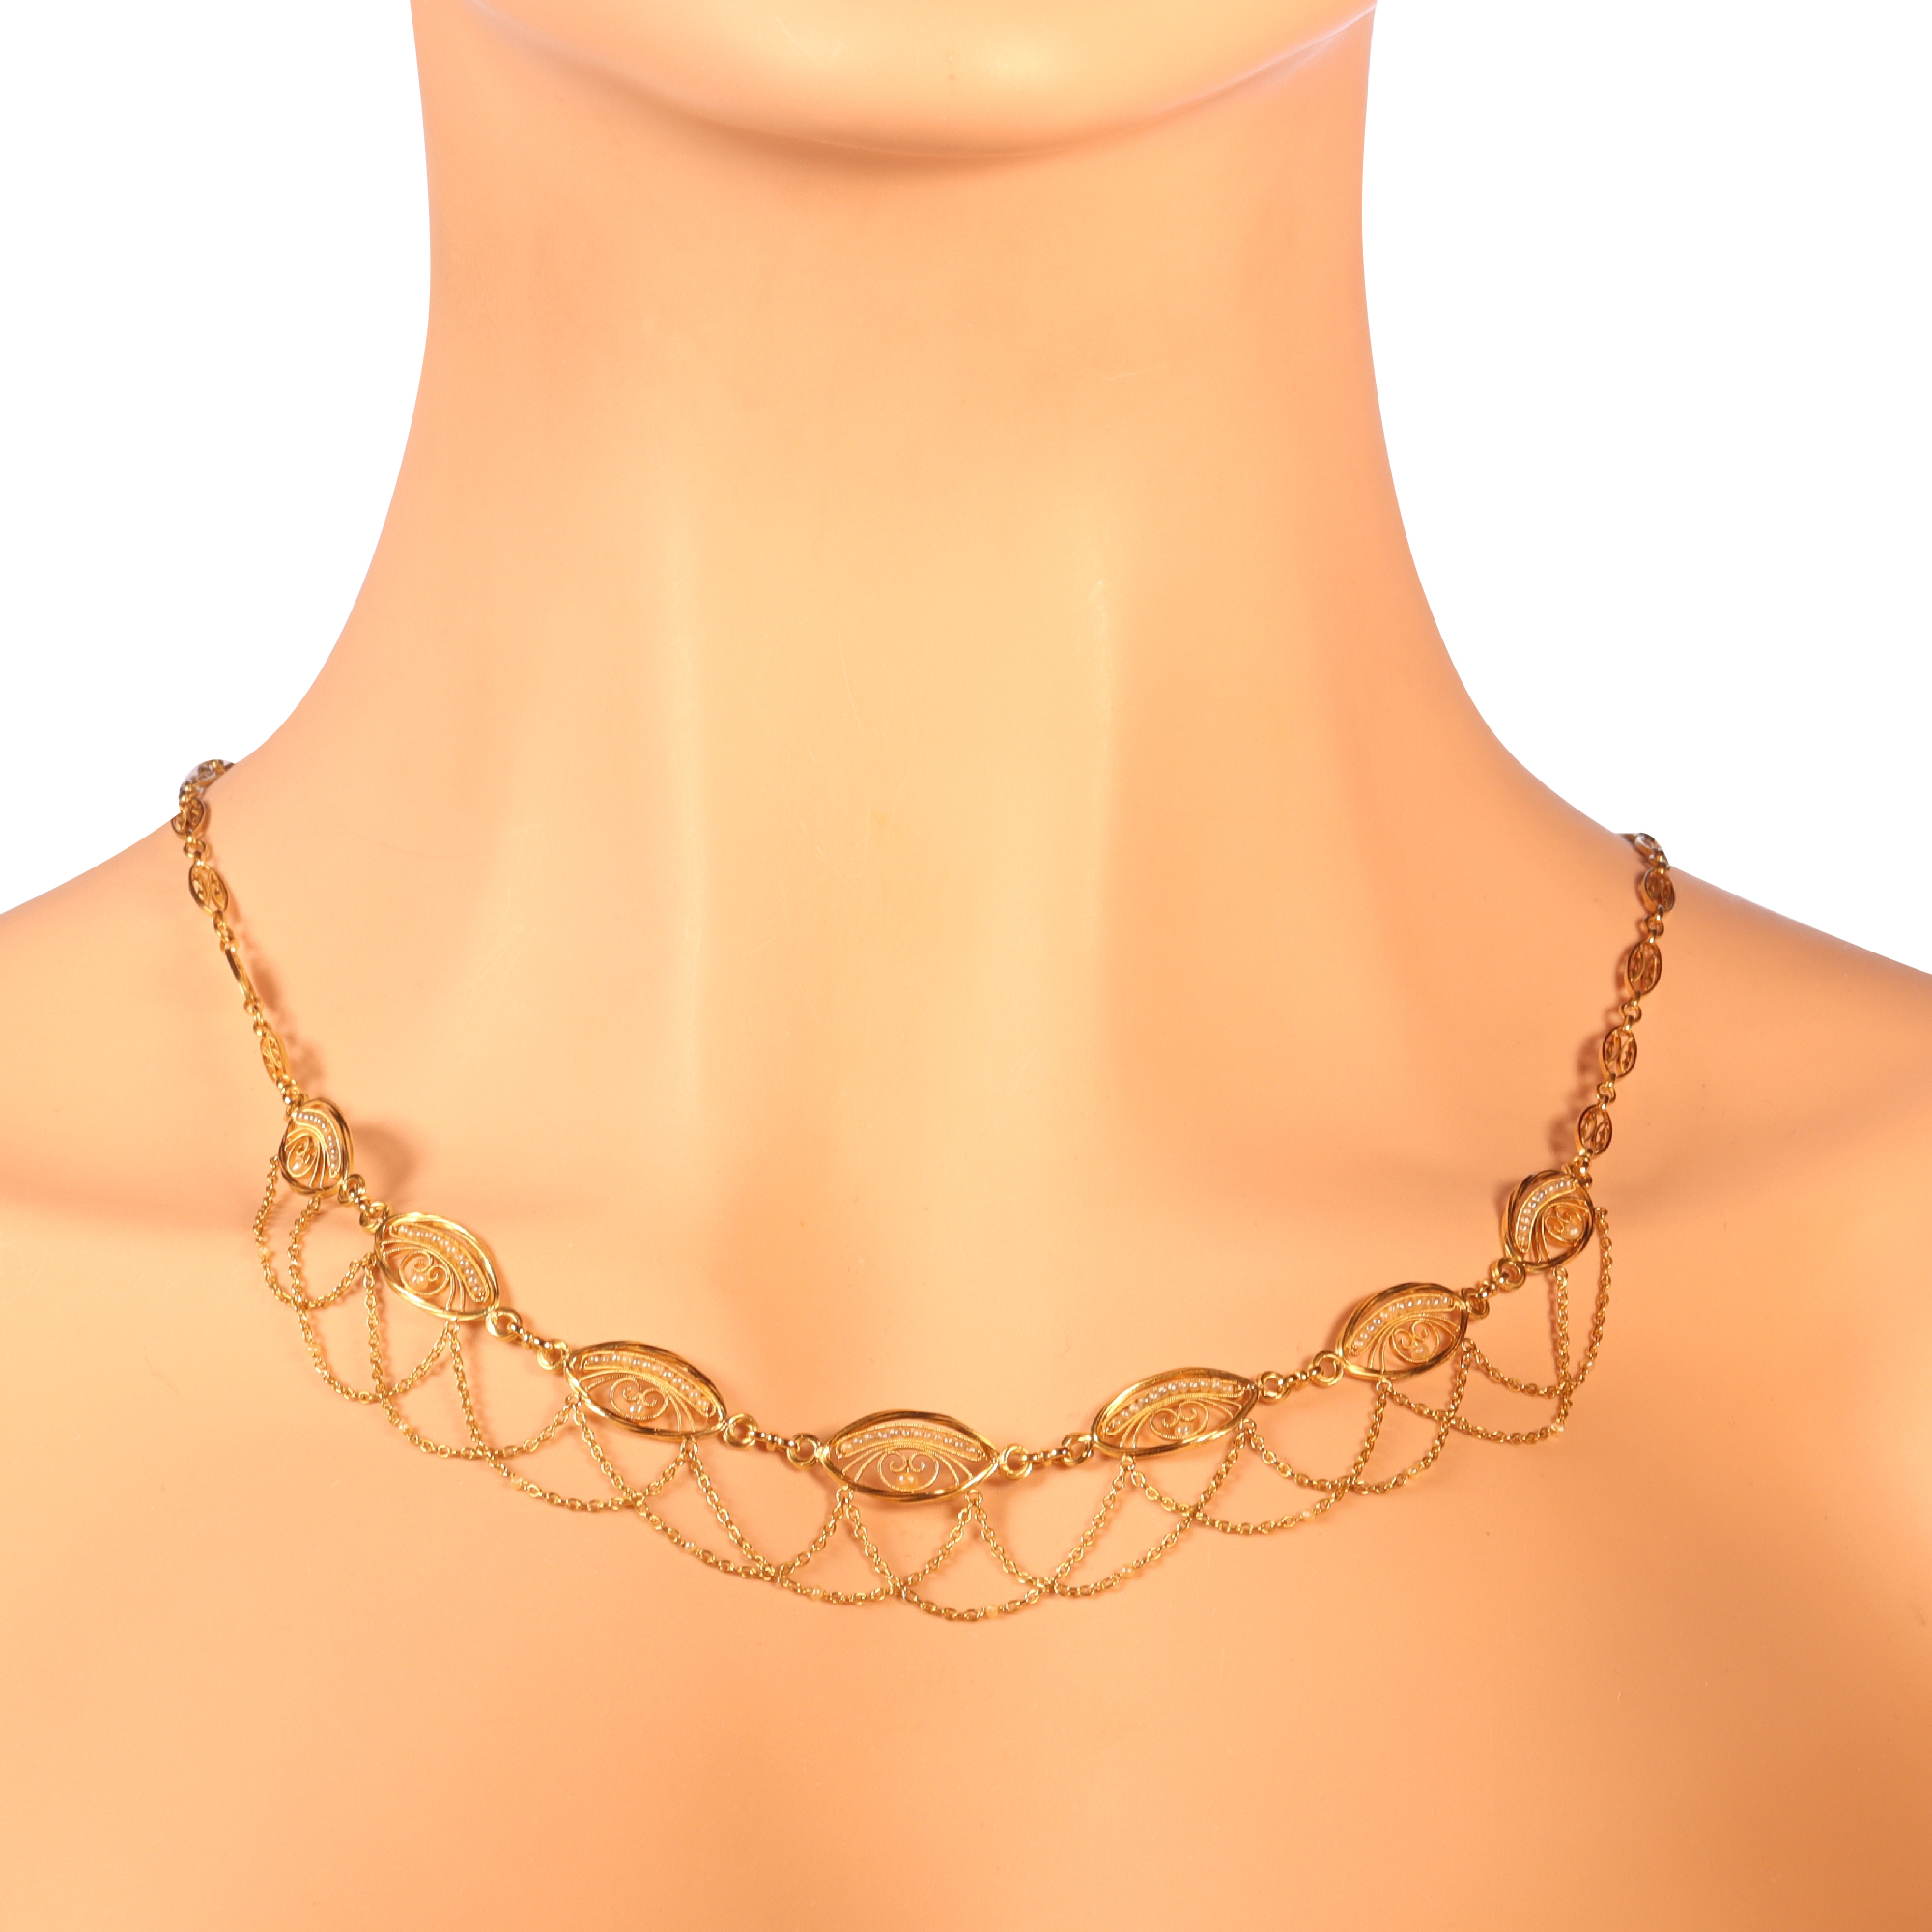 Victorian Grandeur: A Necklace Woven with Gold and Pearls